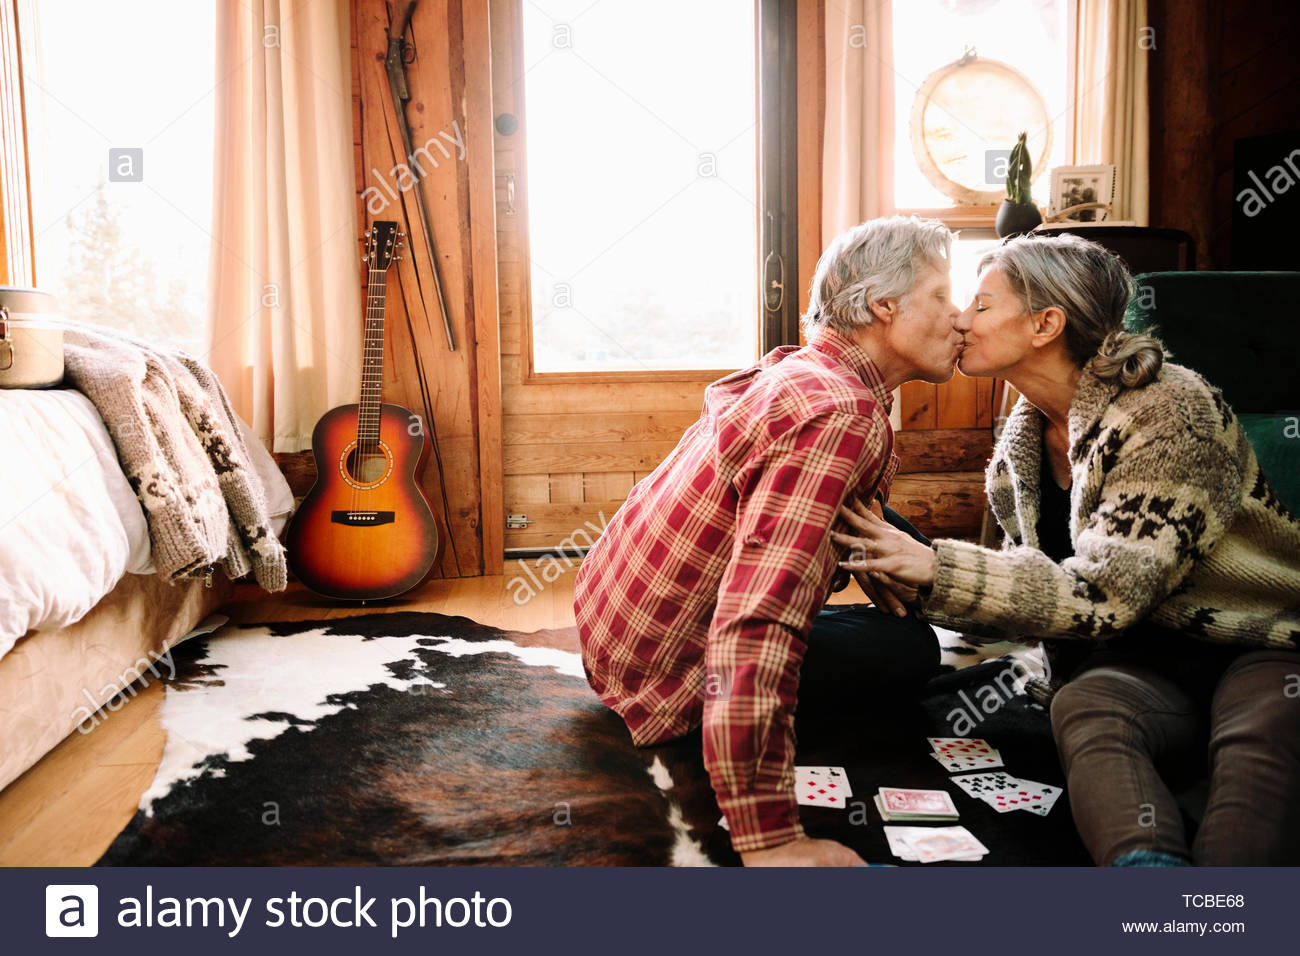 Affectionate mature couple playing cards, kissing in cabin Stock Photo